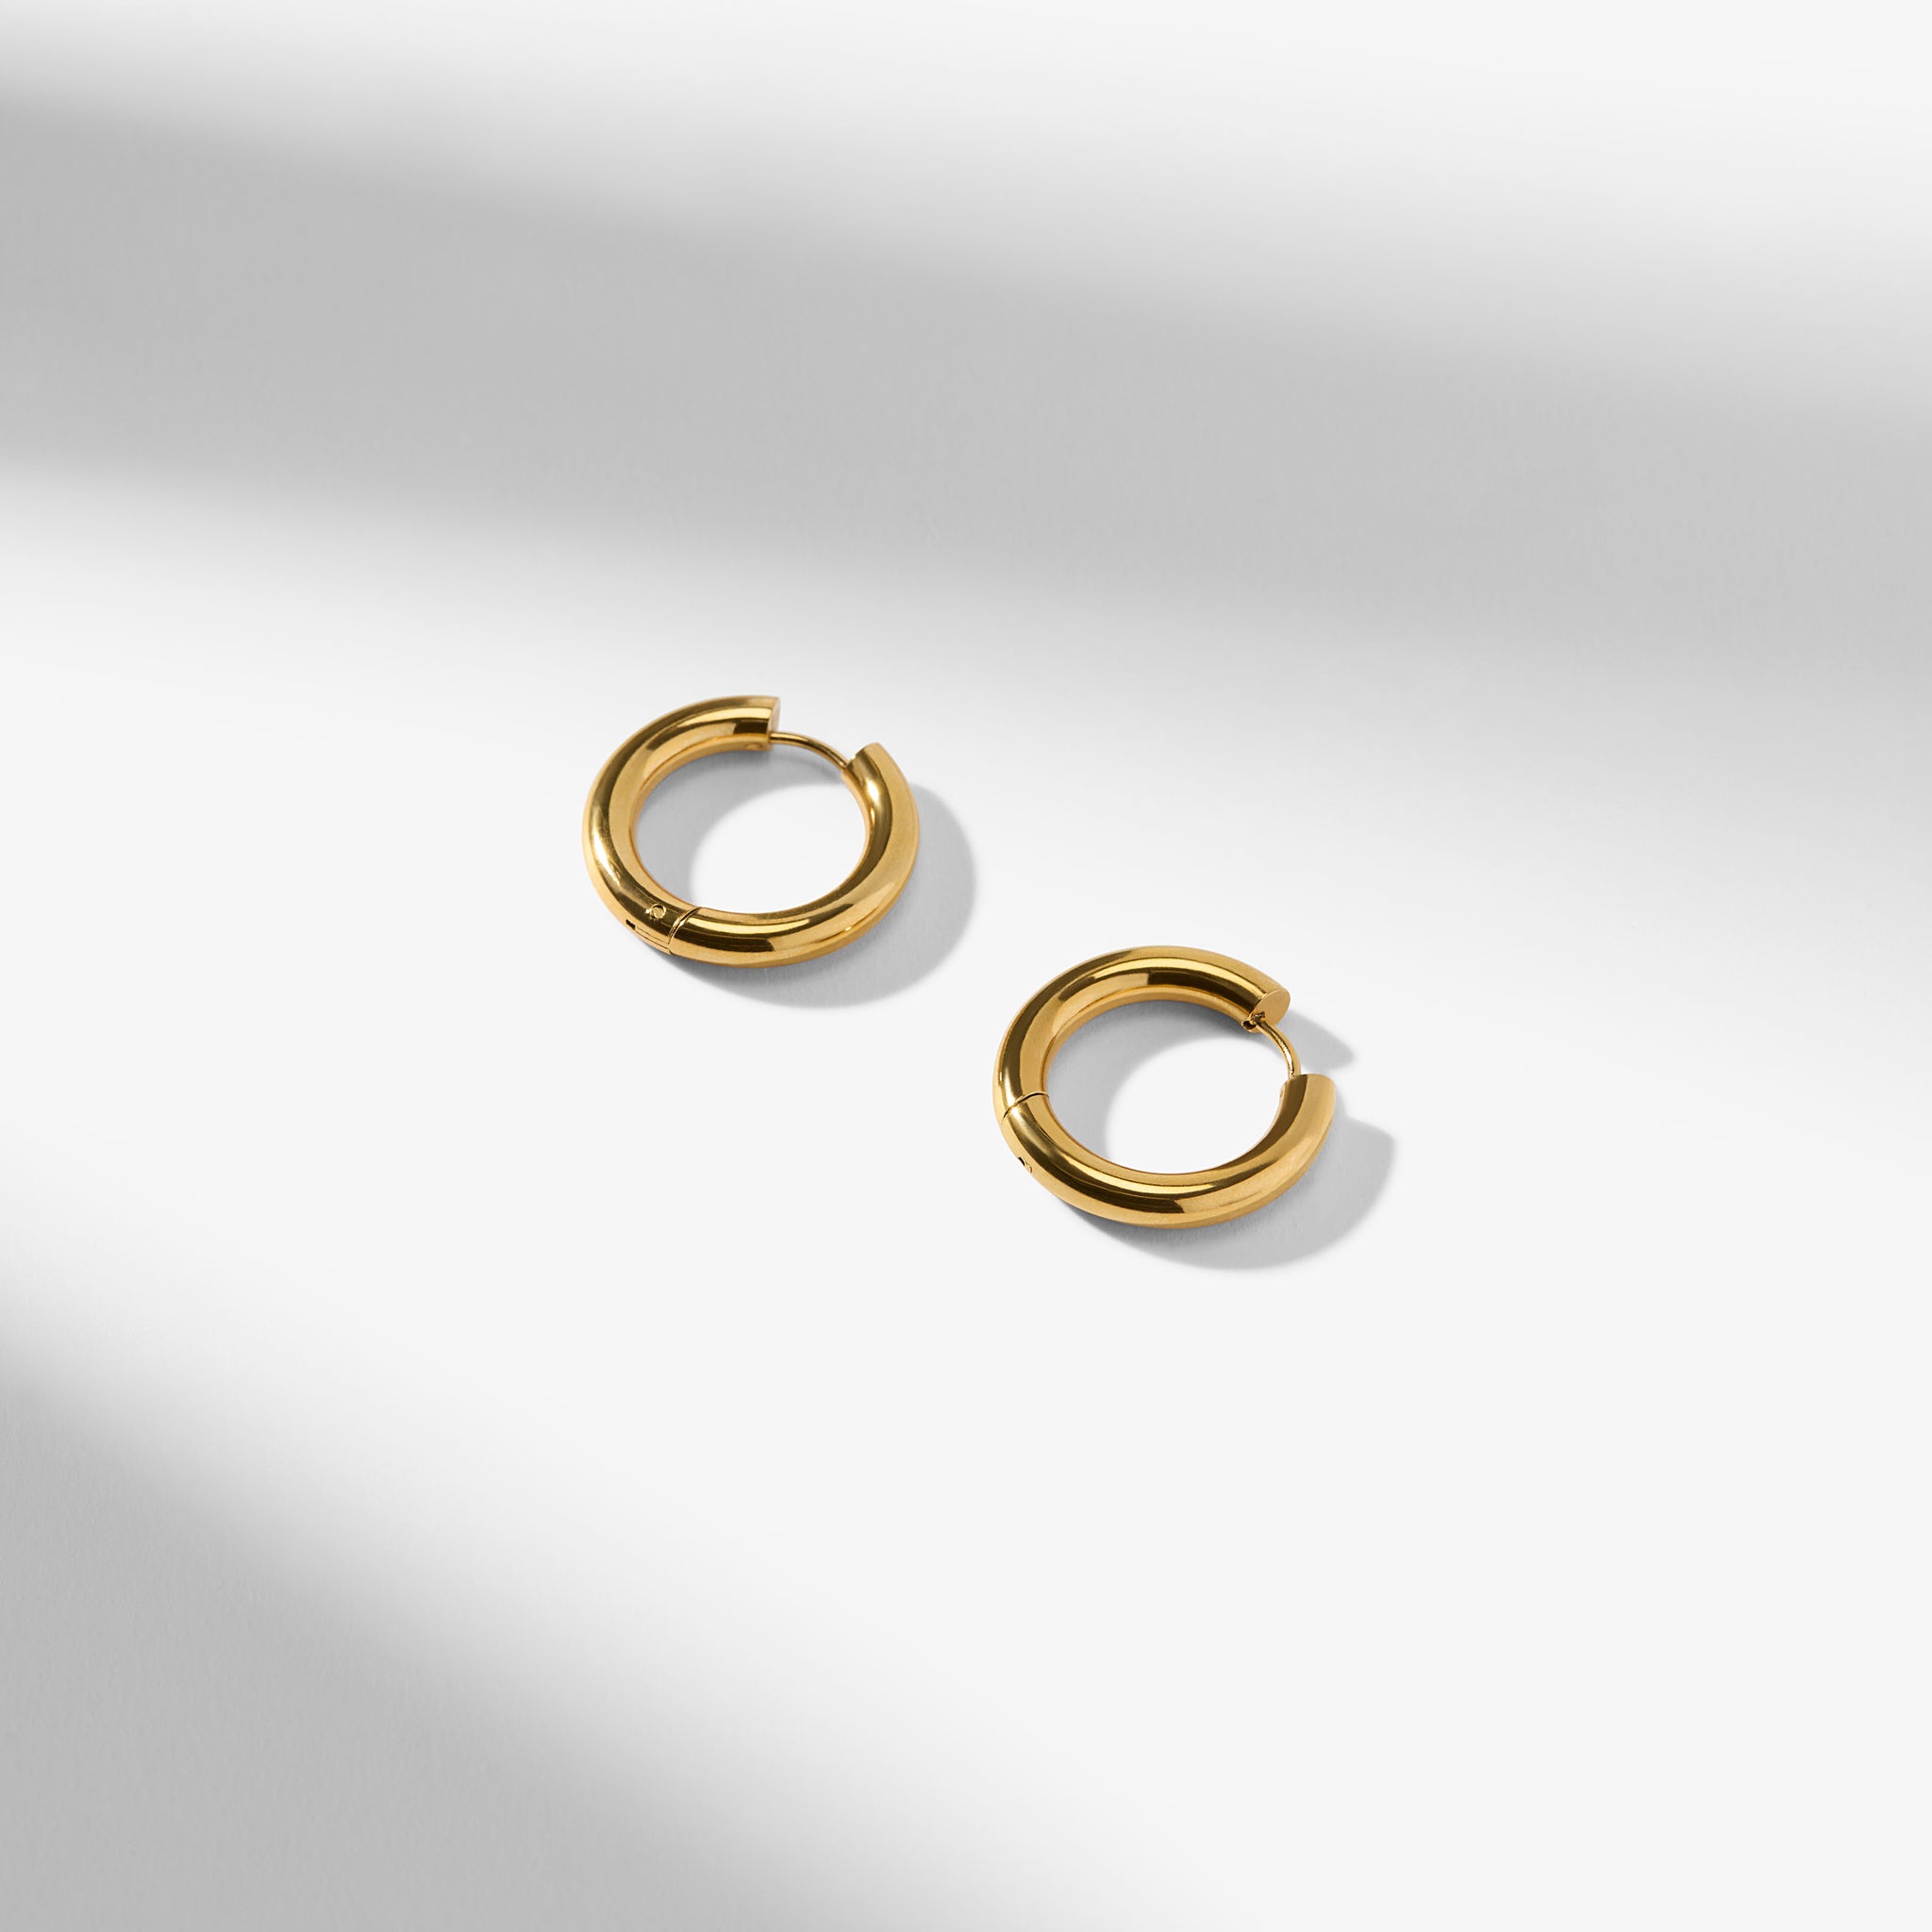 Packshot image of the Claressa Earrings in Gold 